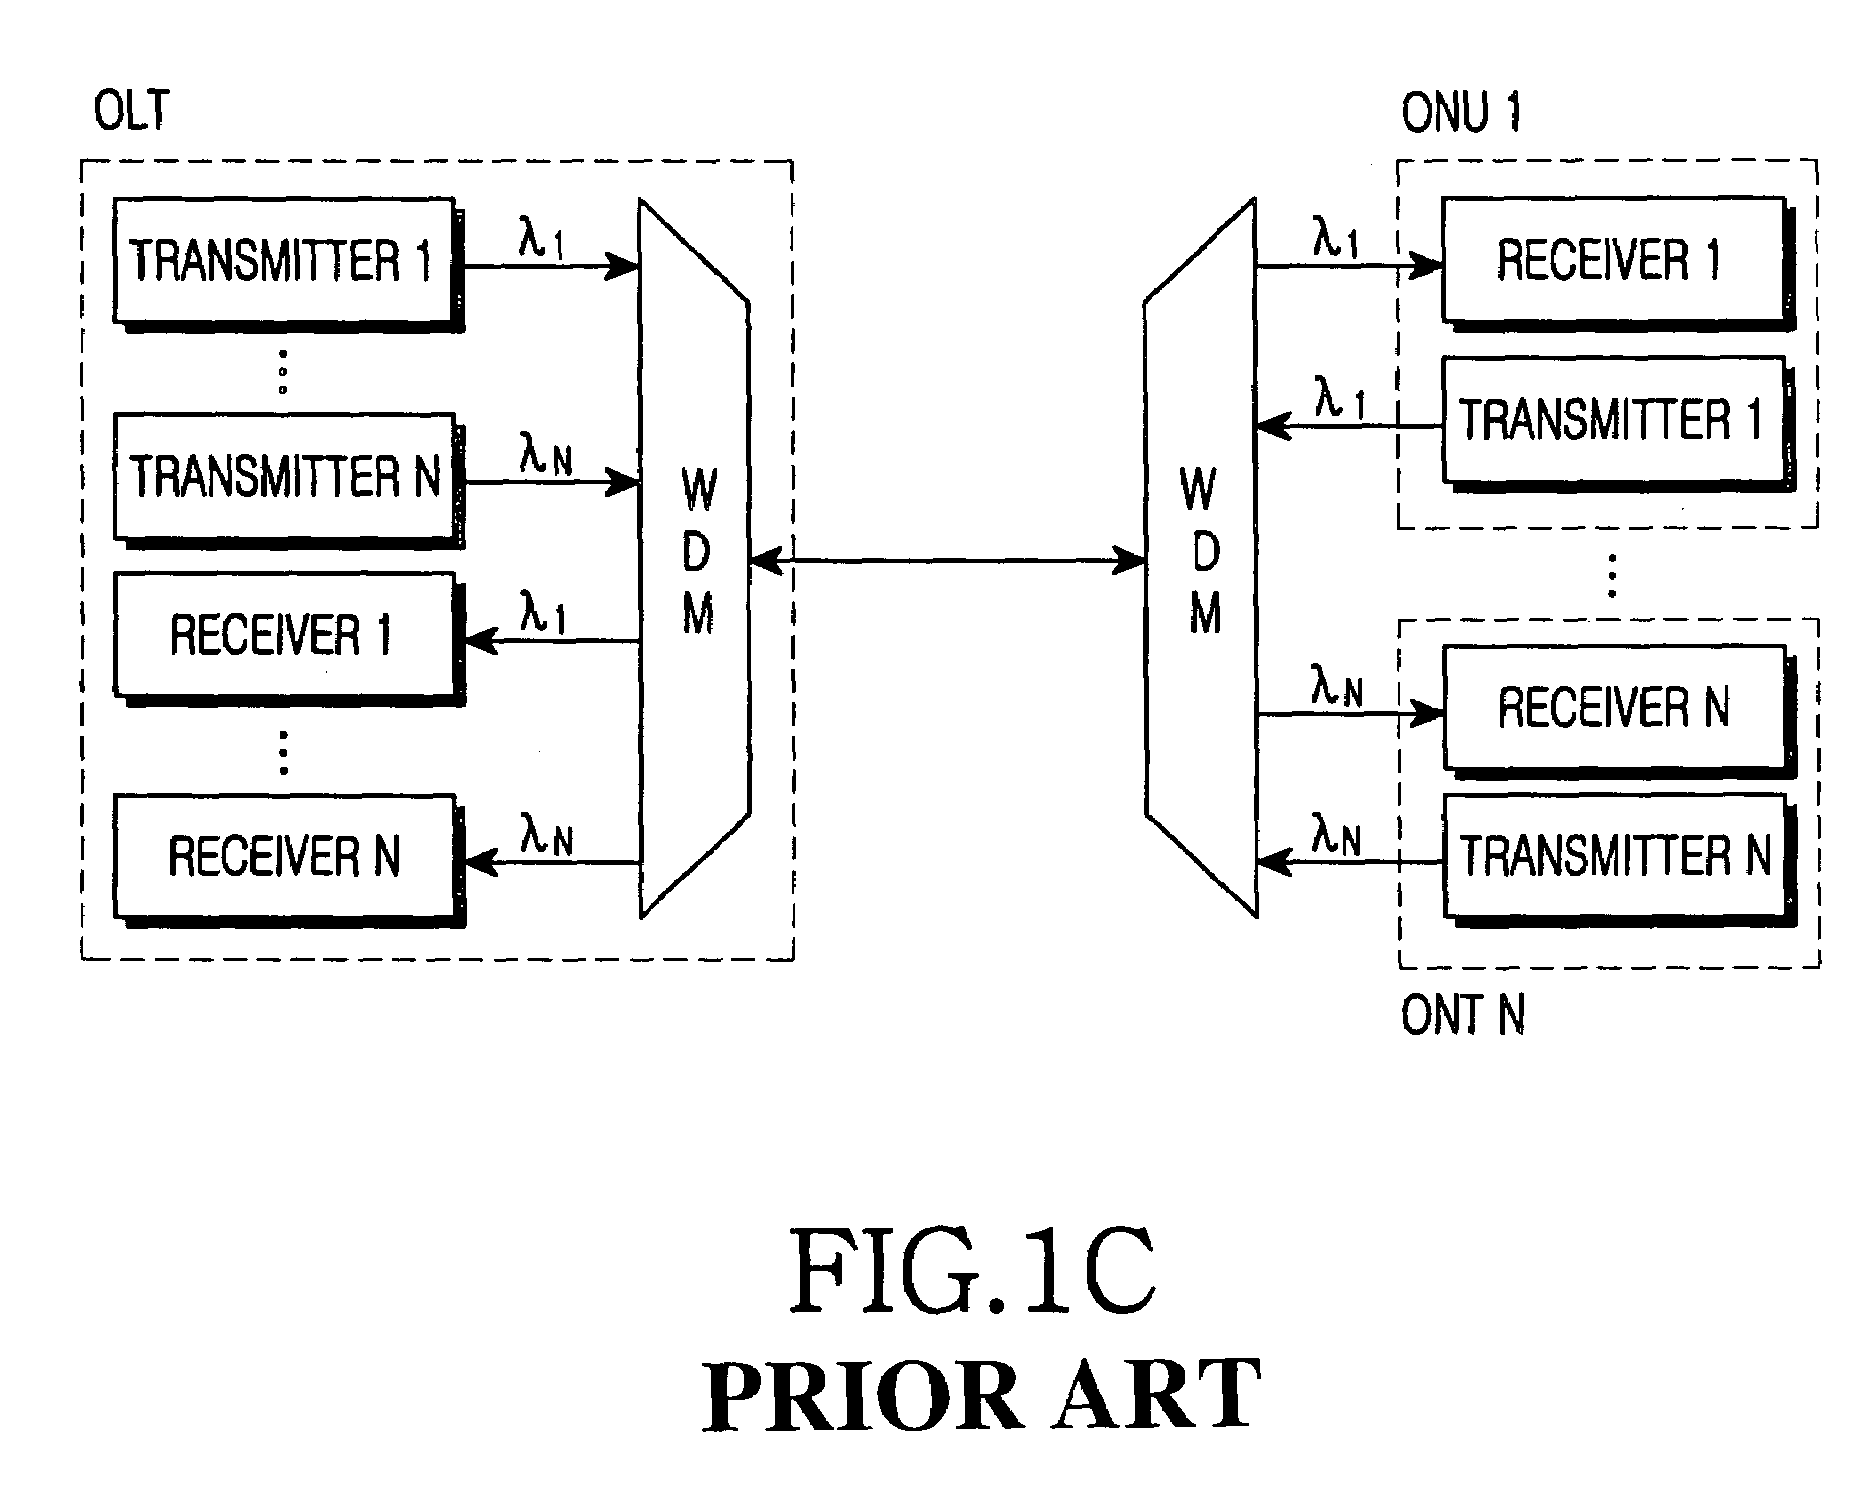 Passive optical network employing code division multiple access